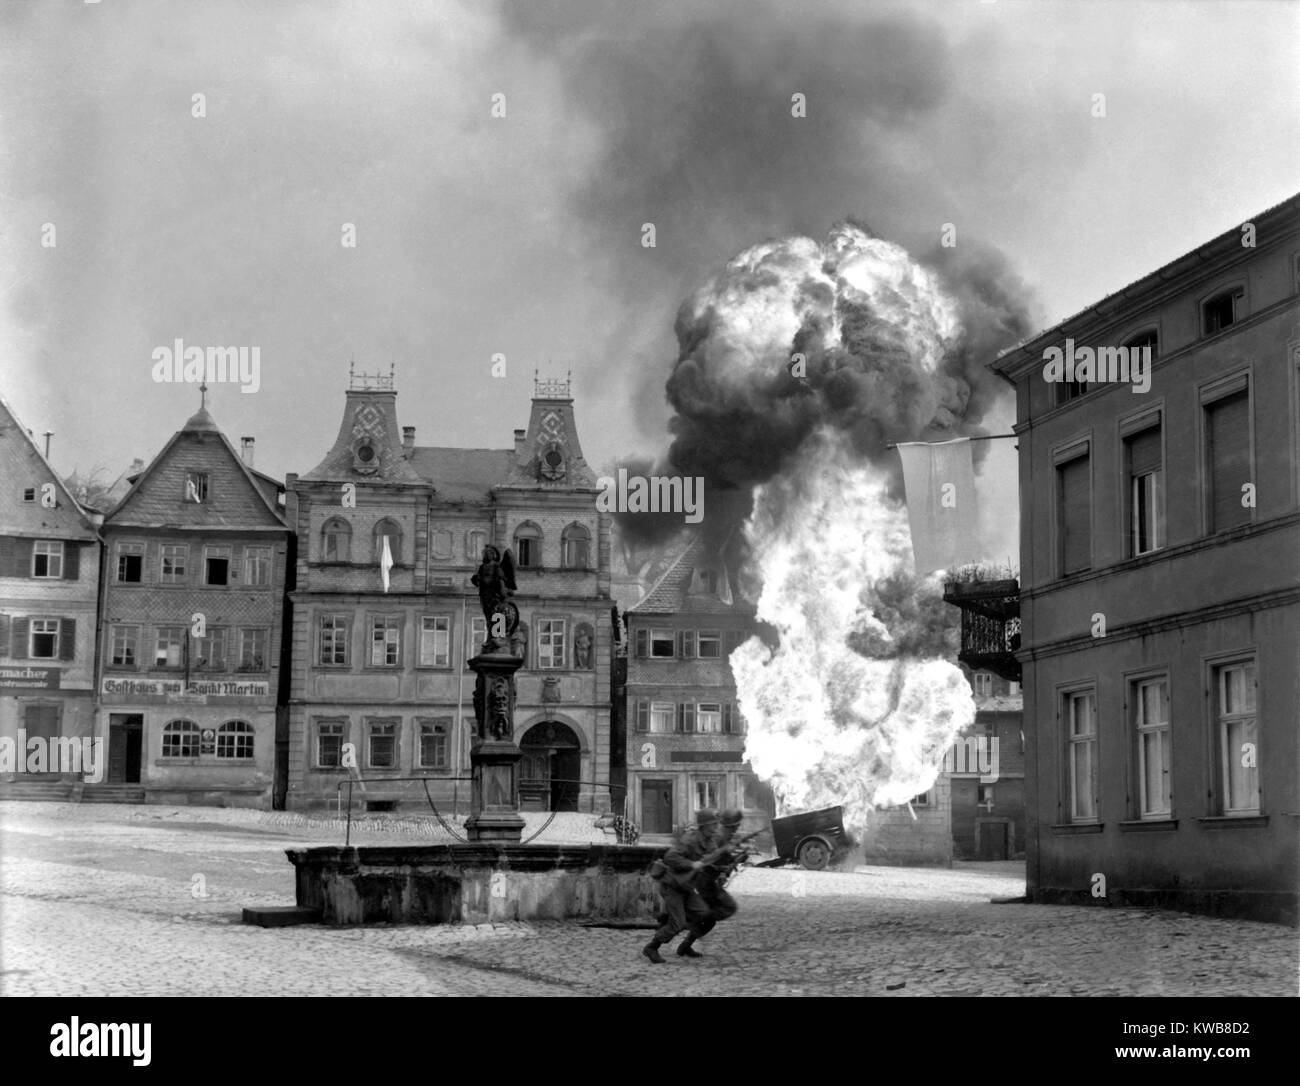 Two soldiers dash past a blazing German gasoline trailer in town square of Kronach, Germany. U.S. 101st Infantry, April 14, 1945. World War 2. (BSLOC 2014 8 75) Stock Photo